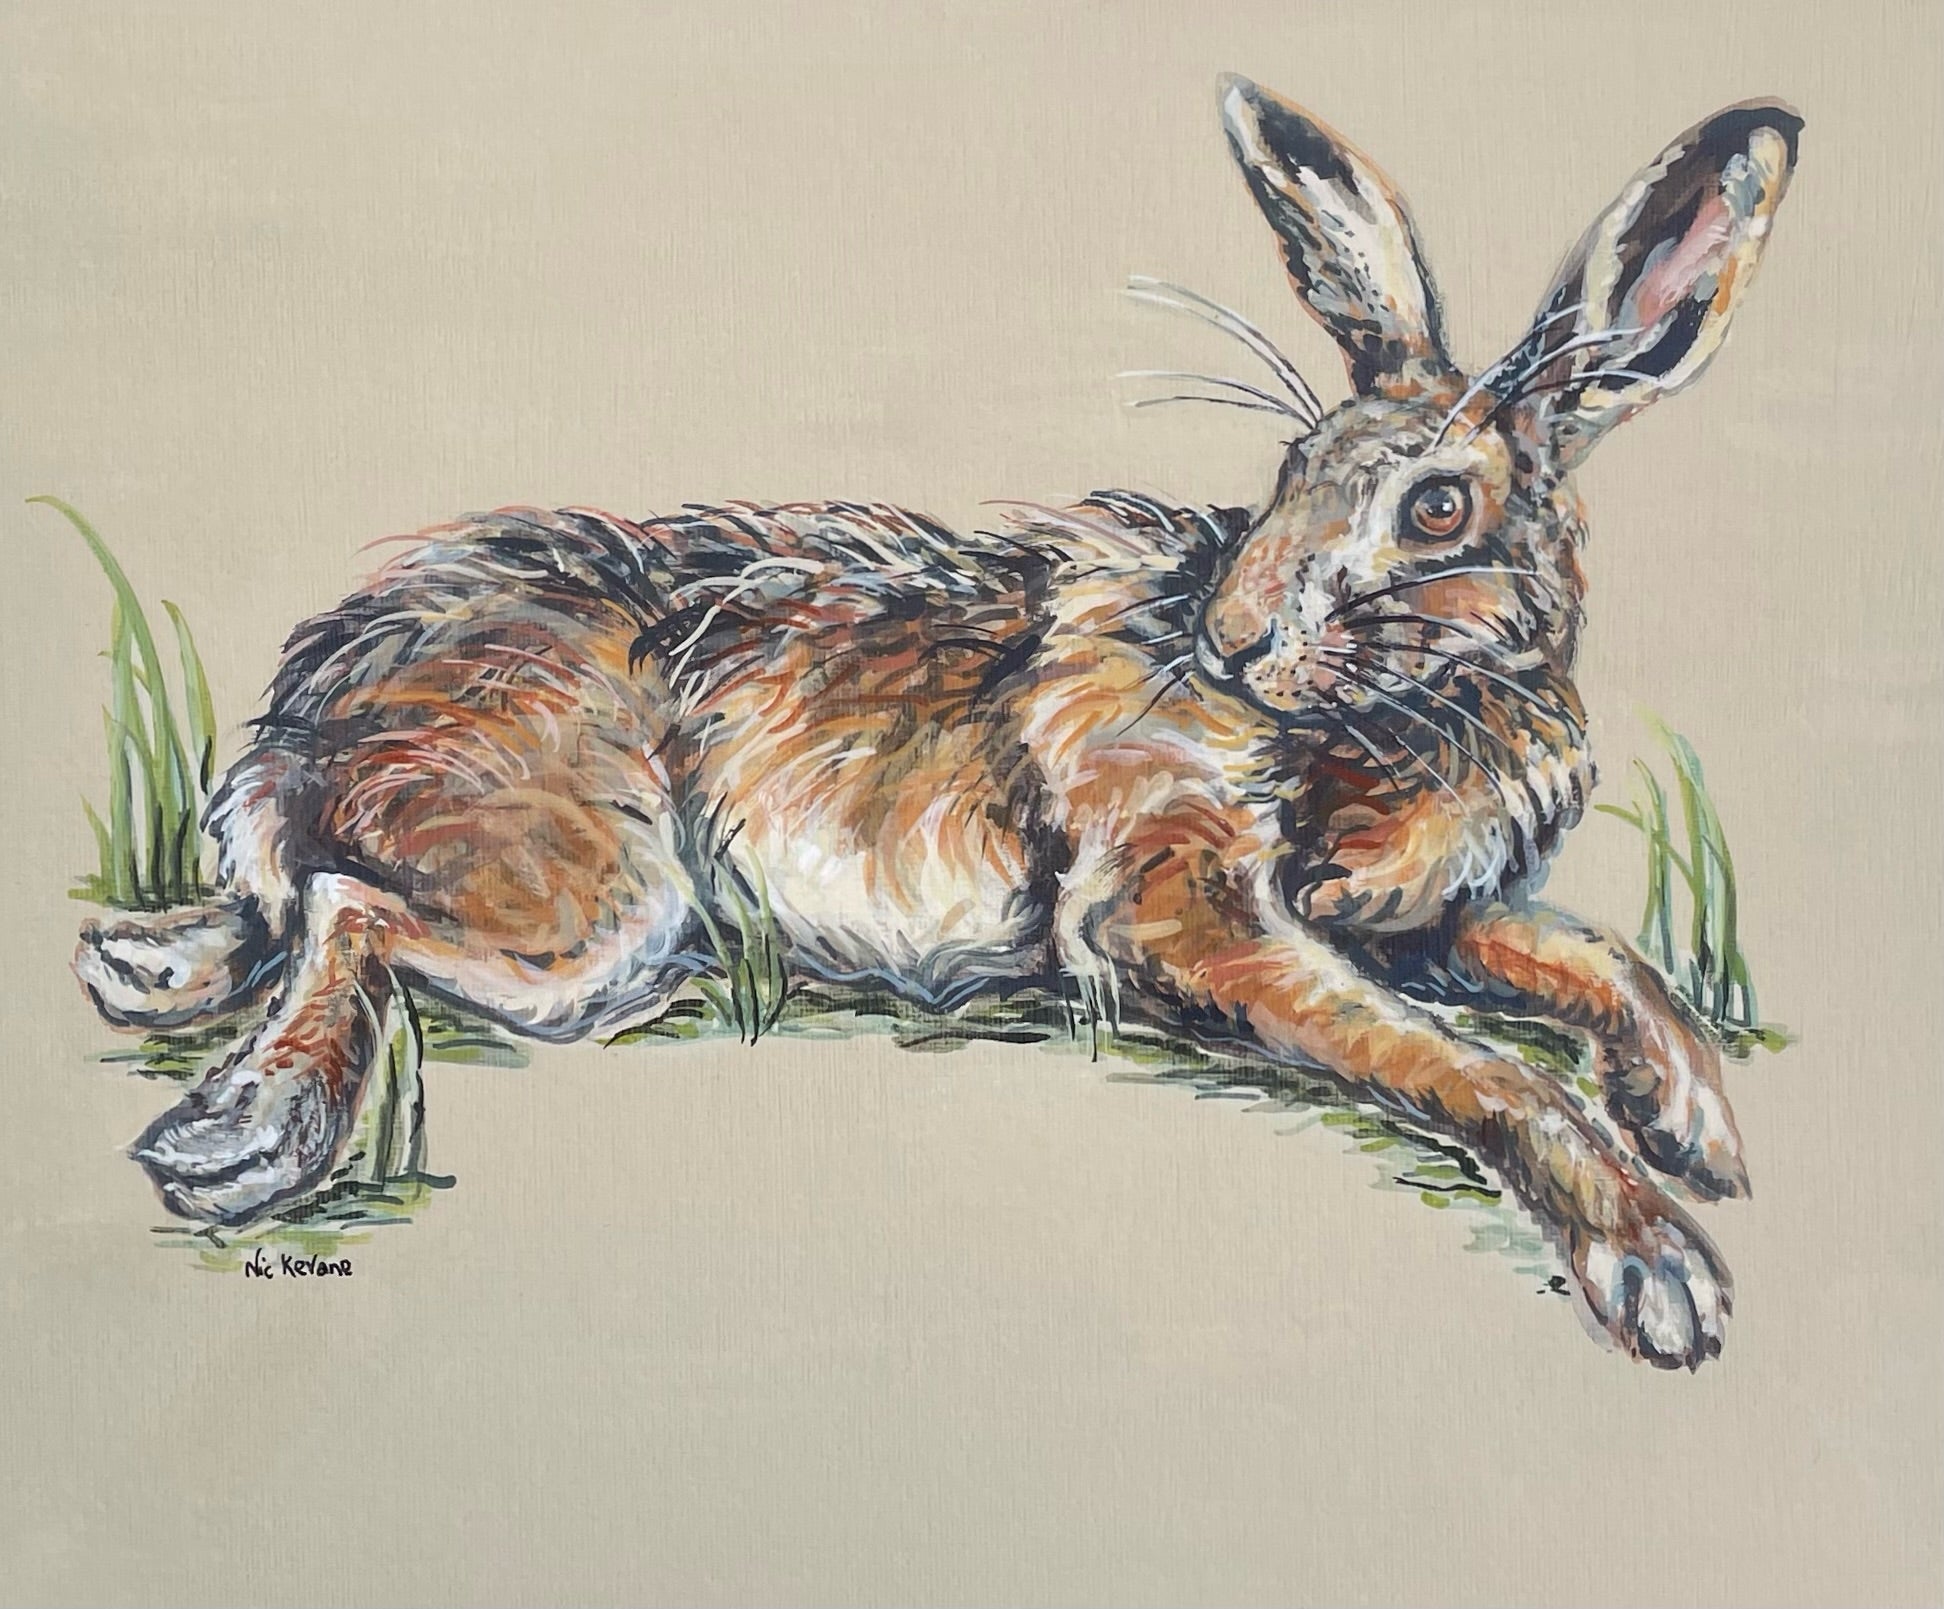 This fine art giclee print shows a hare relaxing in the warmth of the sun.  Inspired by two hares lying in a field of winter wheat in springtime.